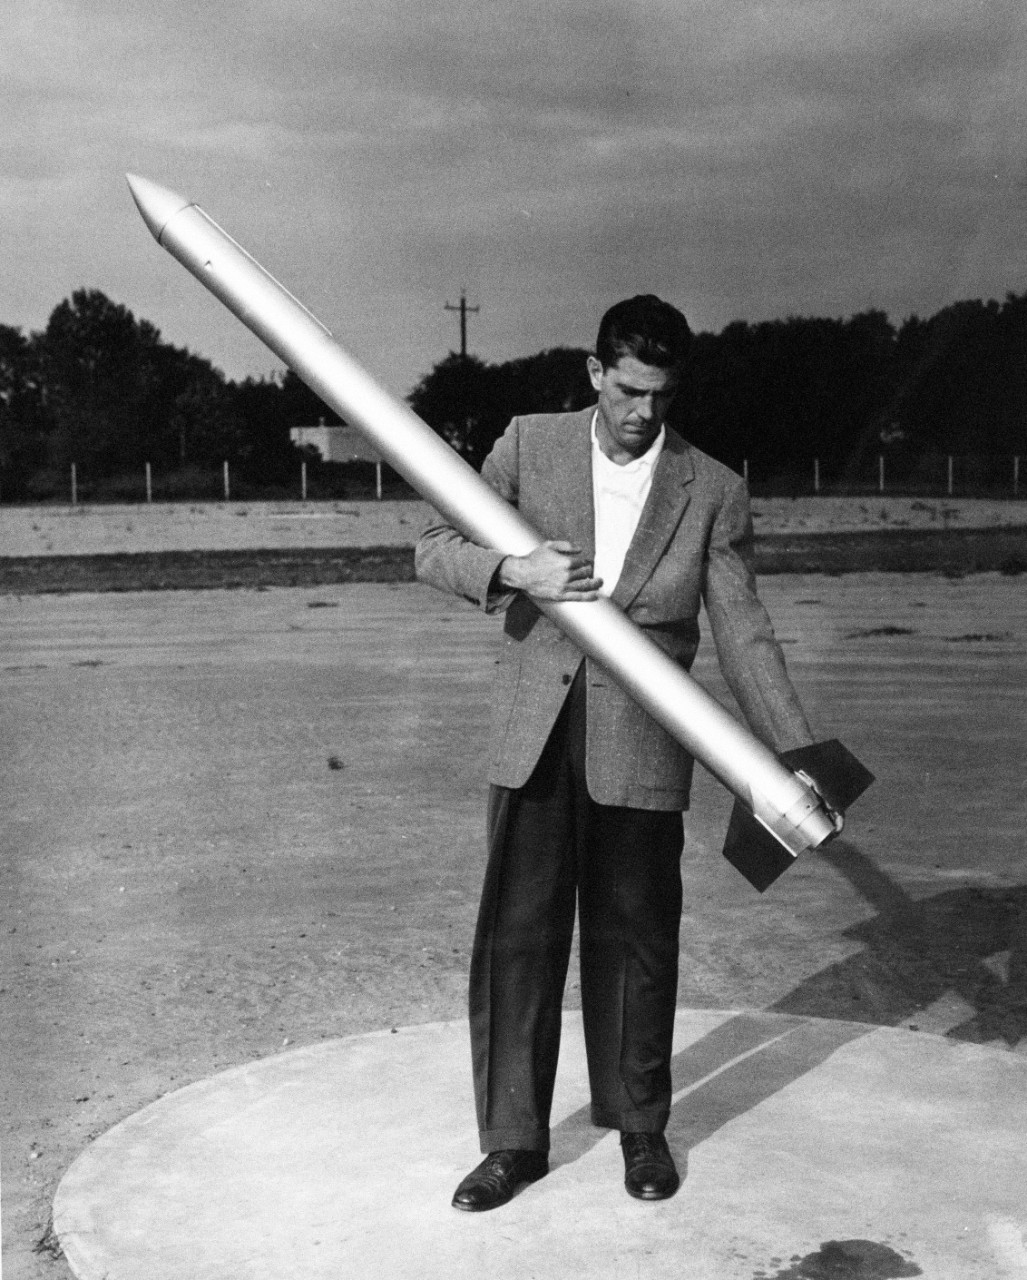 330-PS-9191 (USN 7109279)   Mr. Nelson Sublett holds the U.S. Navy’s Argas rocket, a 72-pound, six food single stage rocket.   Mr. Sublett words for the Office of Naval Research, 15 October 1958.   Official U.S. Navy photograph, now in the collections of the National Archives.     